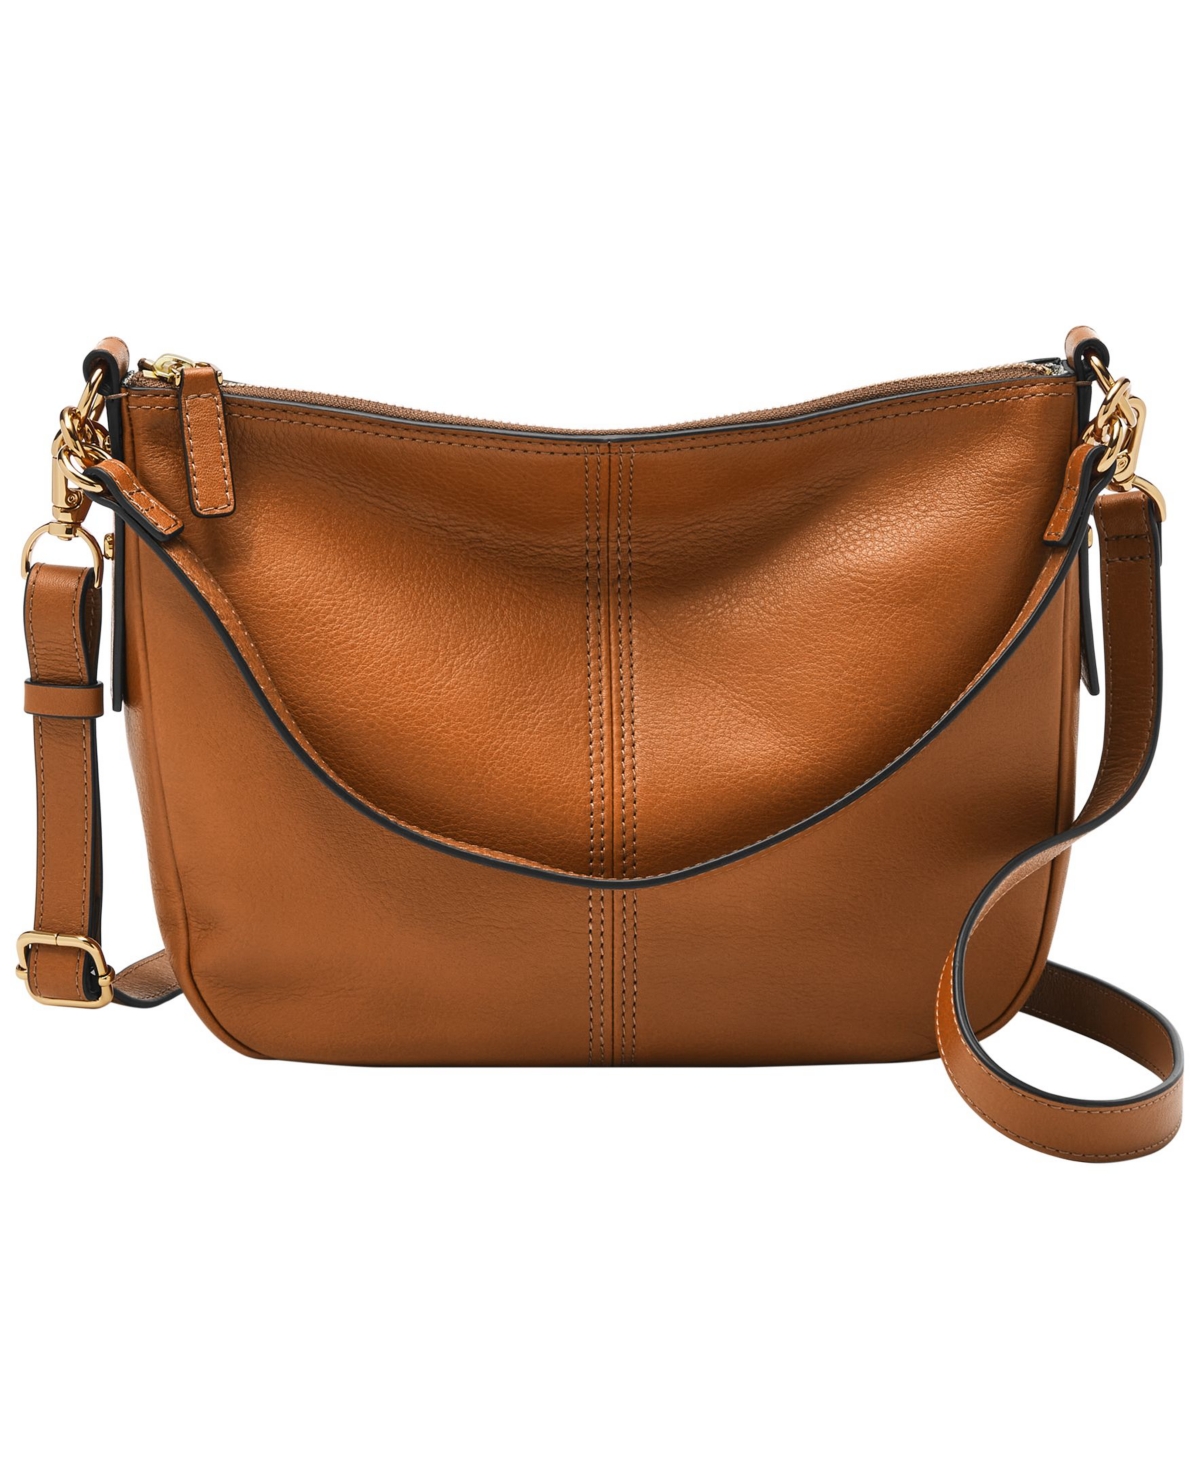 Fossil Jolie Leather Crossbody Bag In Saddle